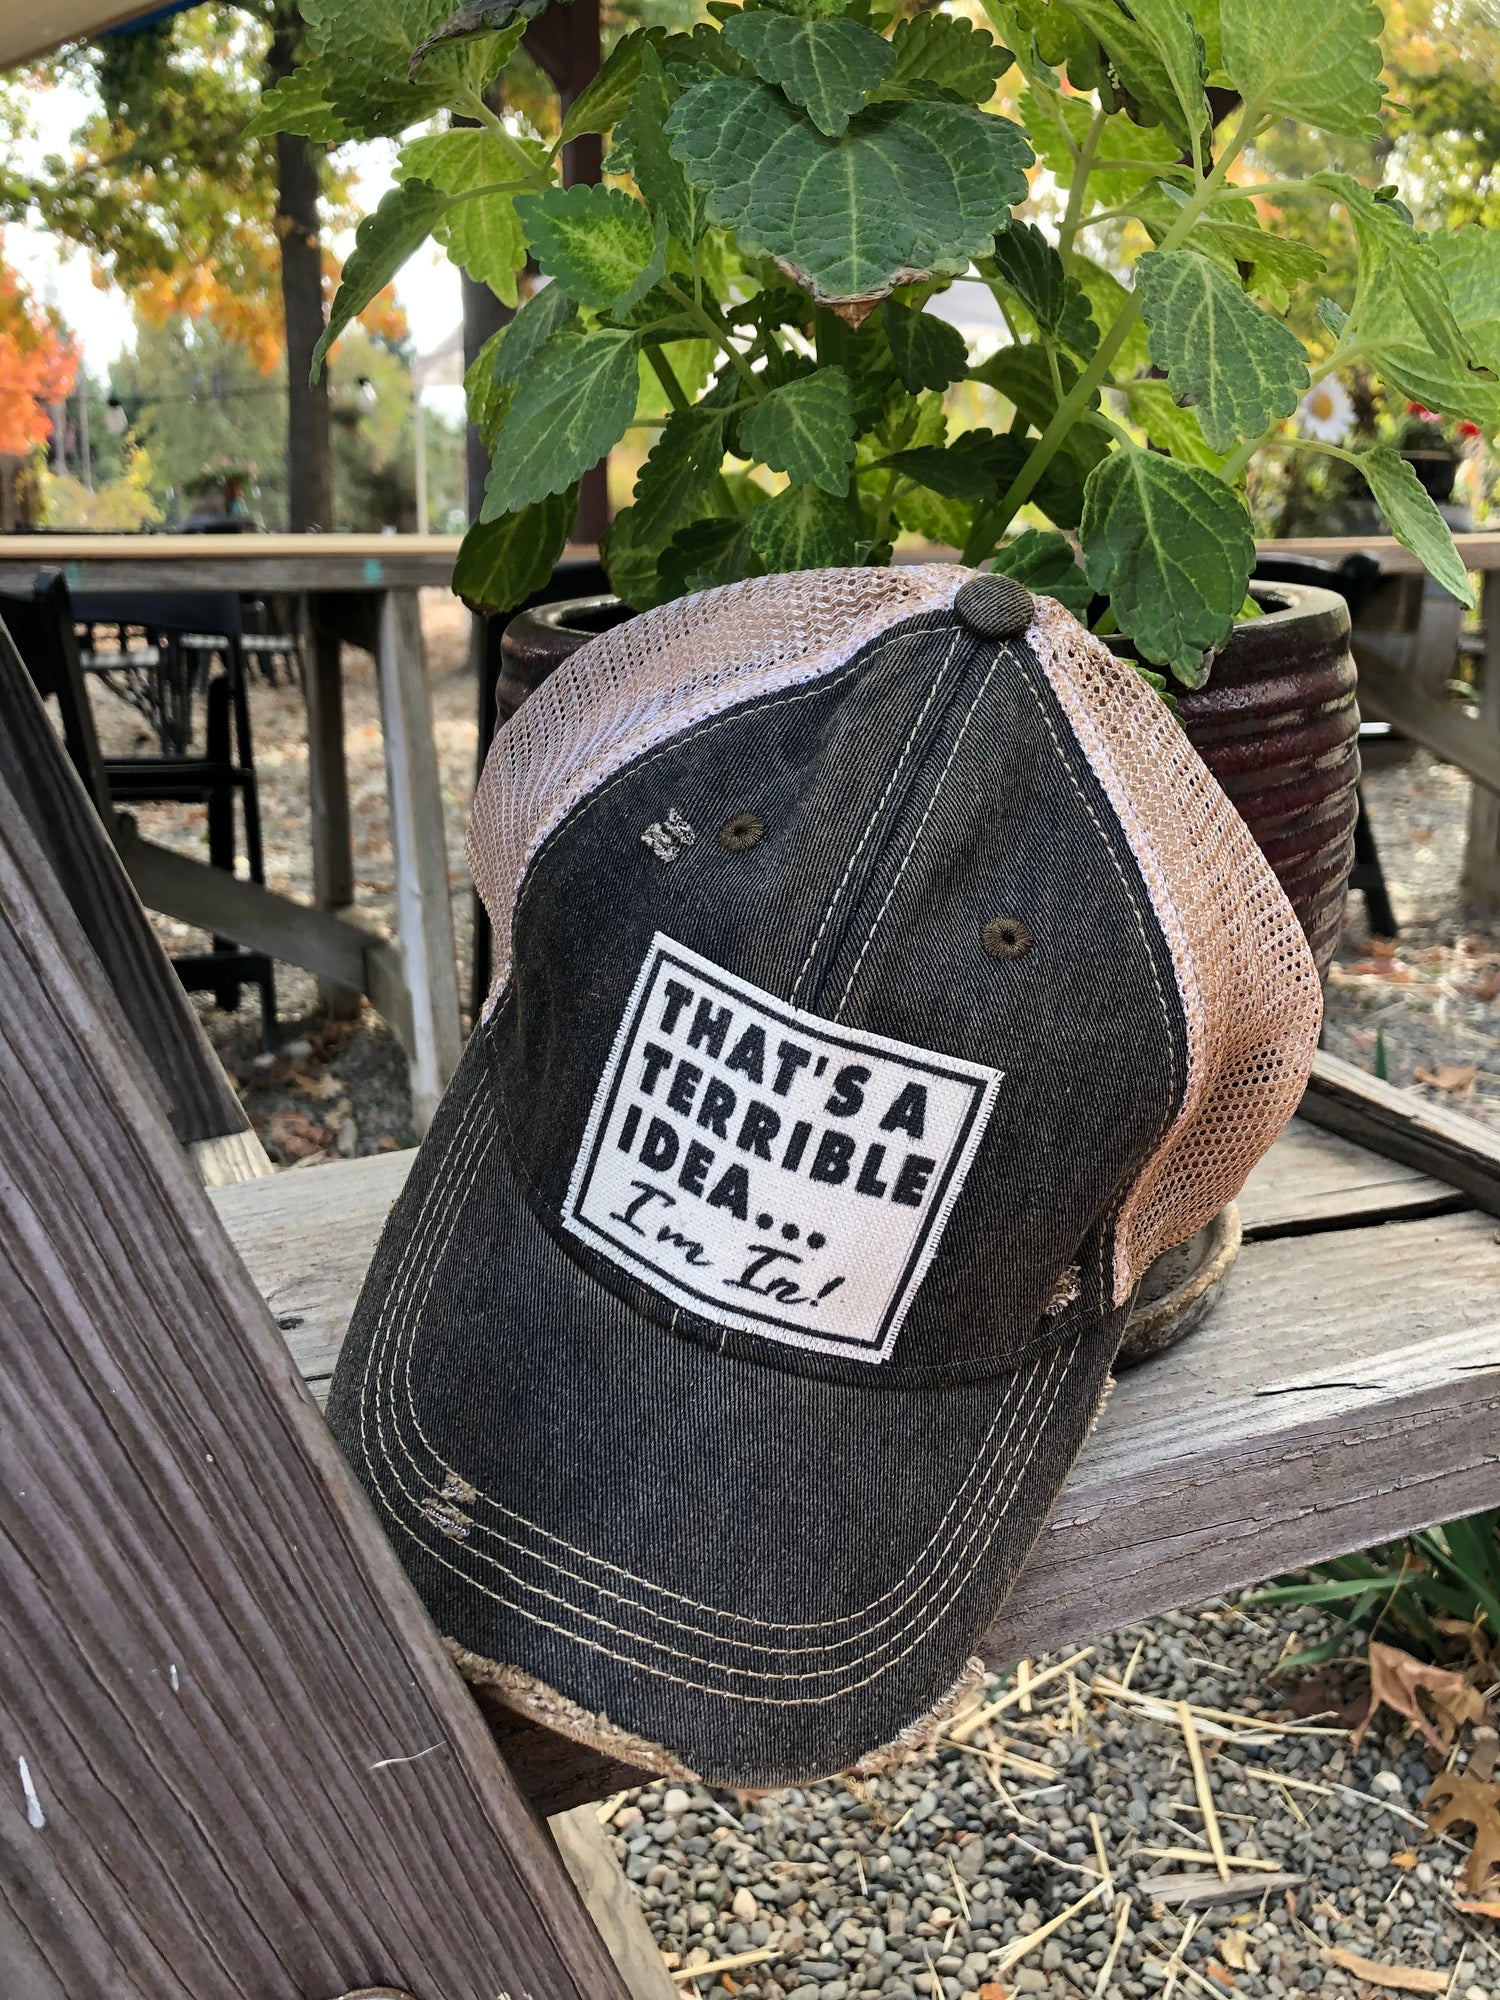 That's a Terrible IdeaI'm In! Distressed Trucker Cap